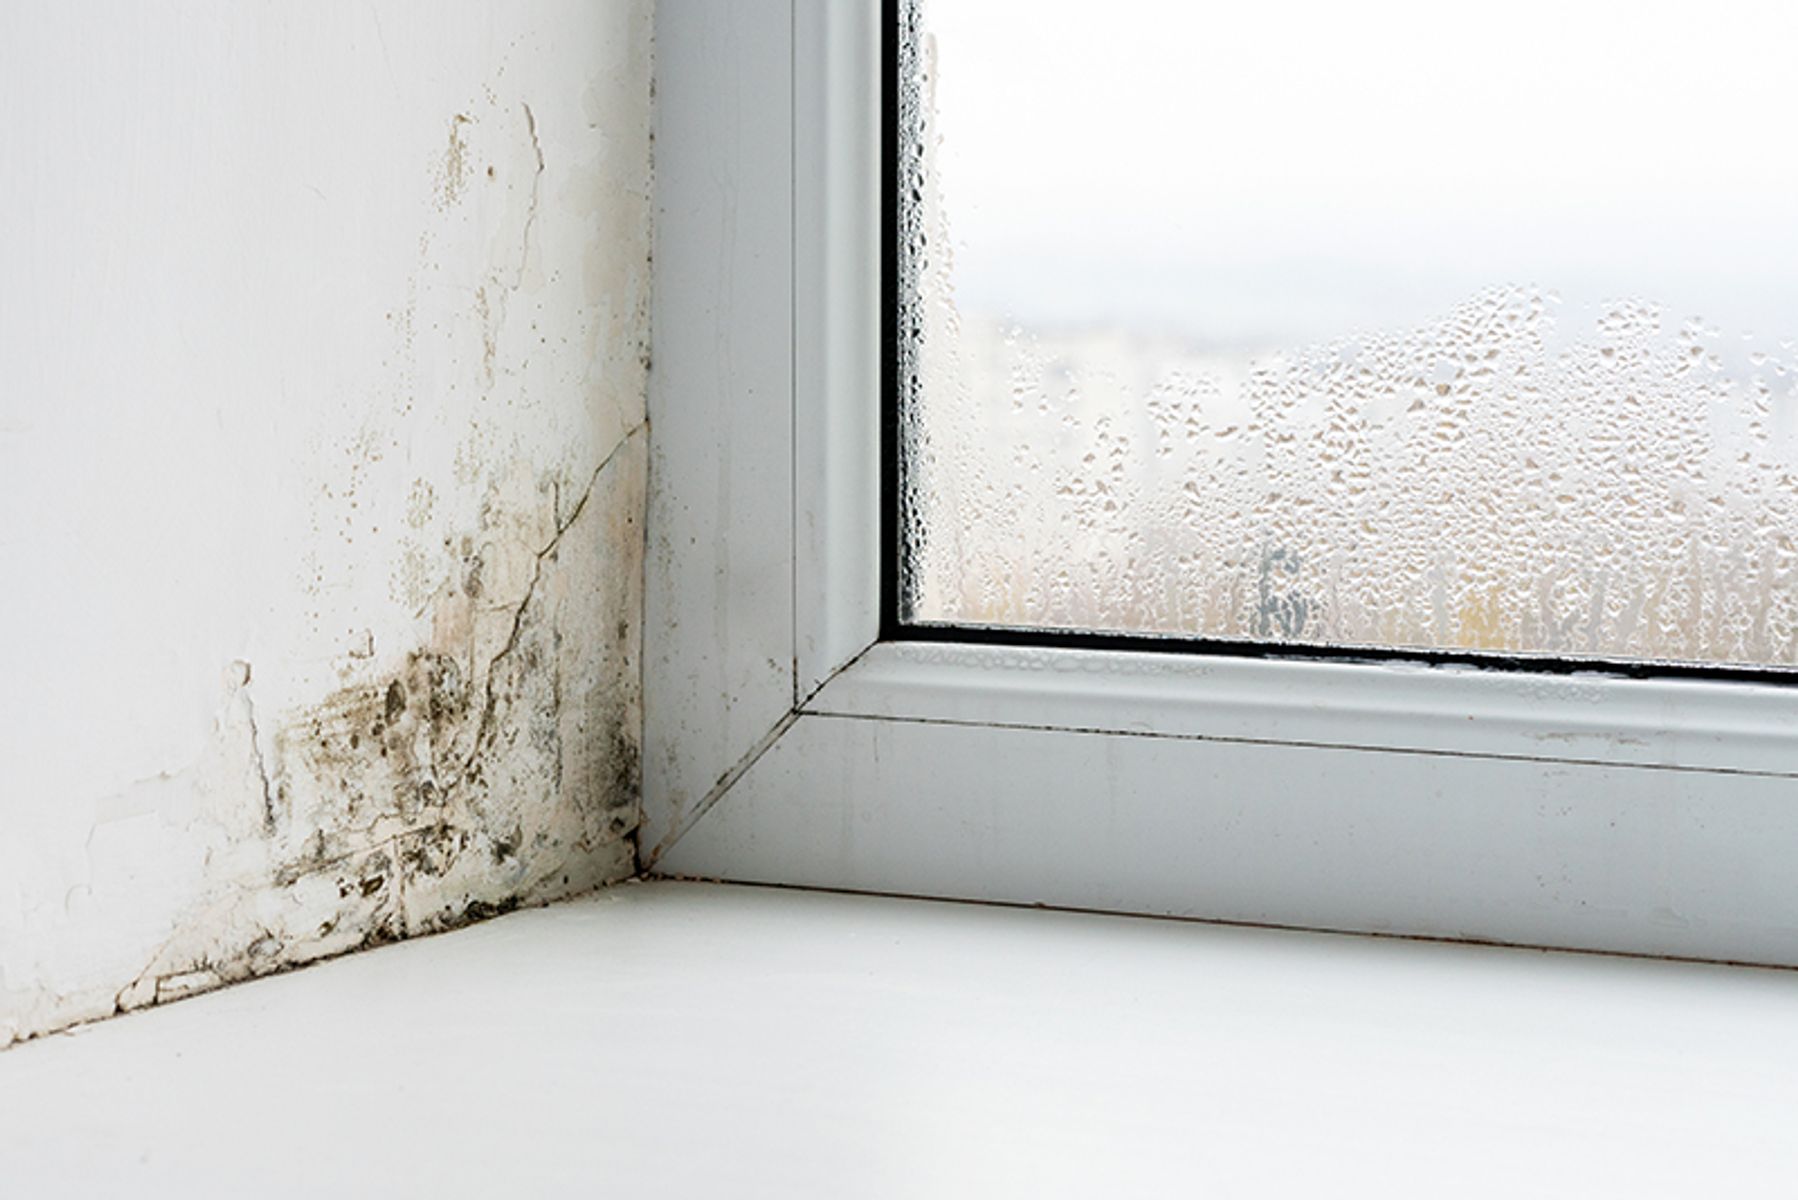 DEALING WITH CONDENSATION AND MOULD: CAUSES, PREVENTION AND REMOVAL